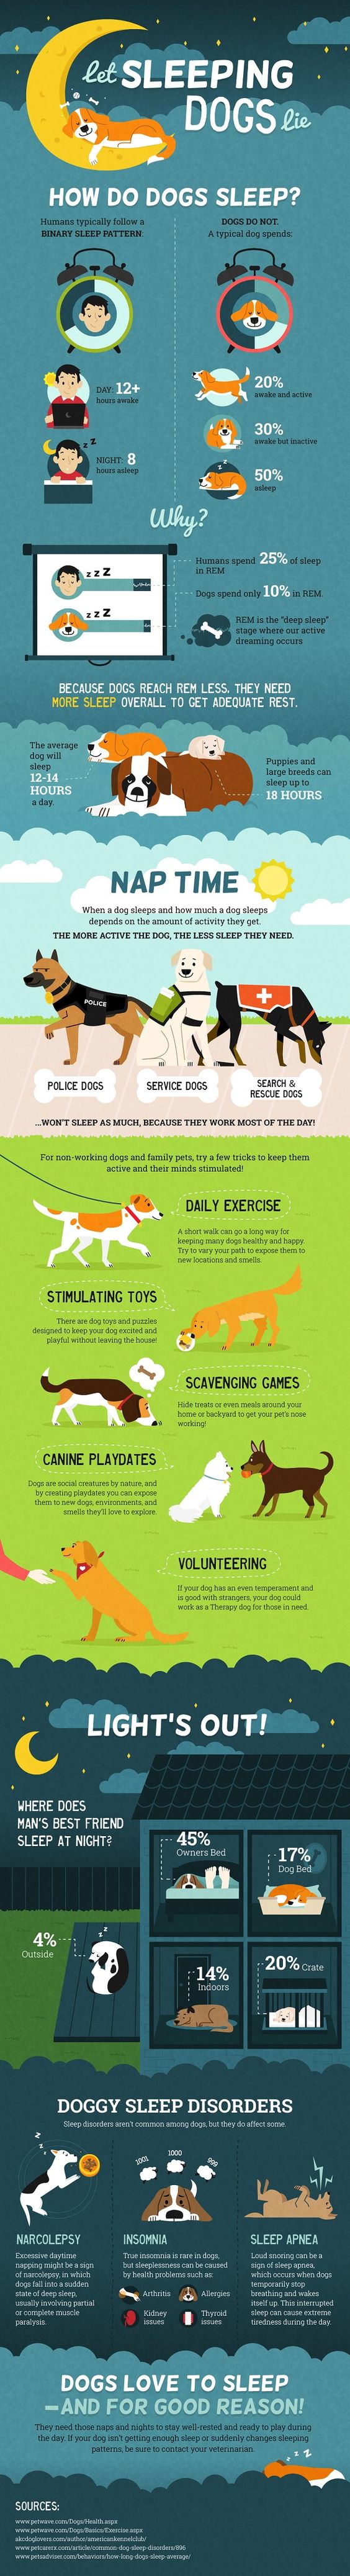 Dog Infographic: how much sleep do dogs need, let sleeping dogs lie